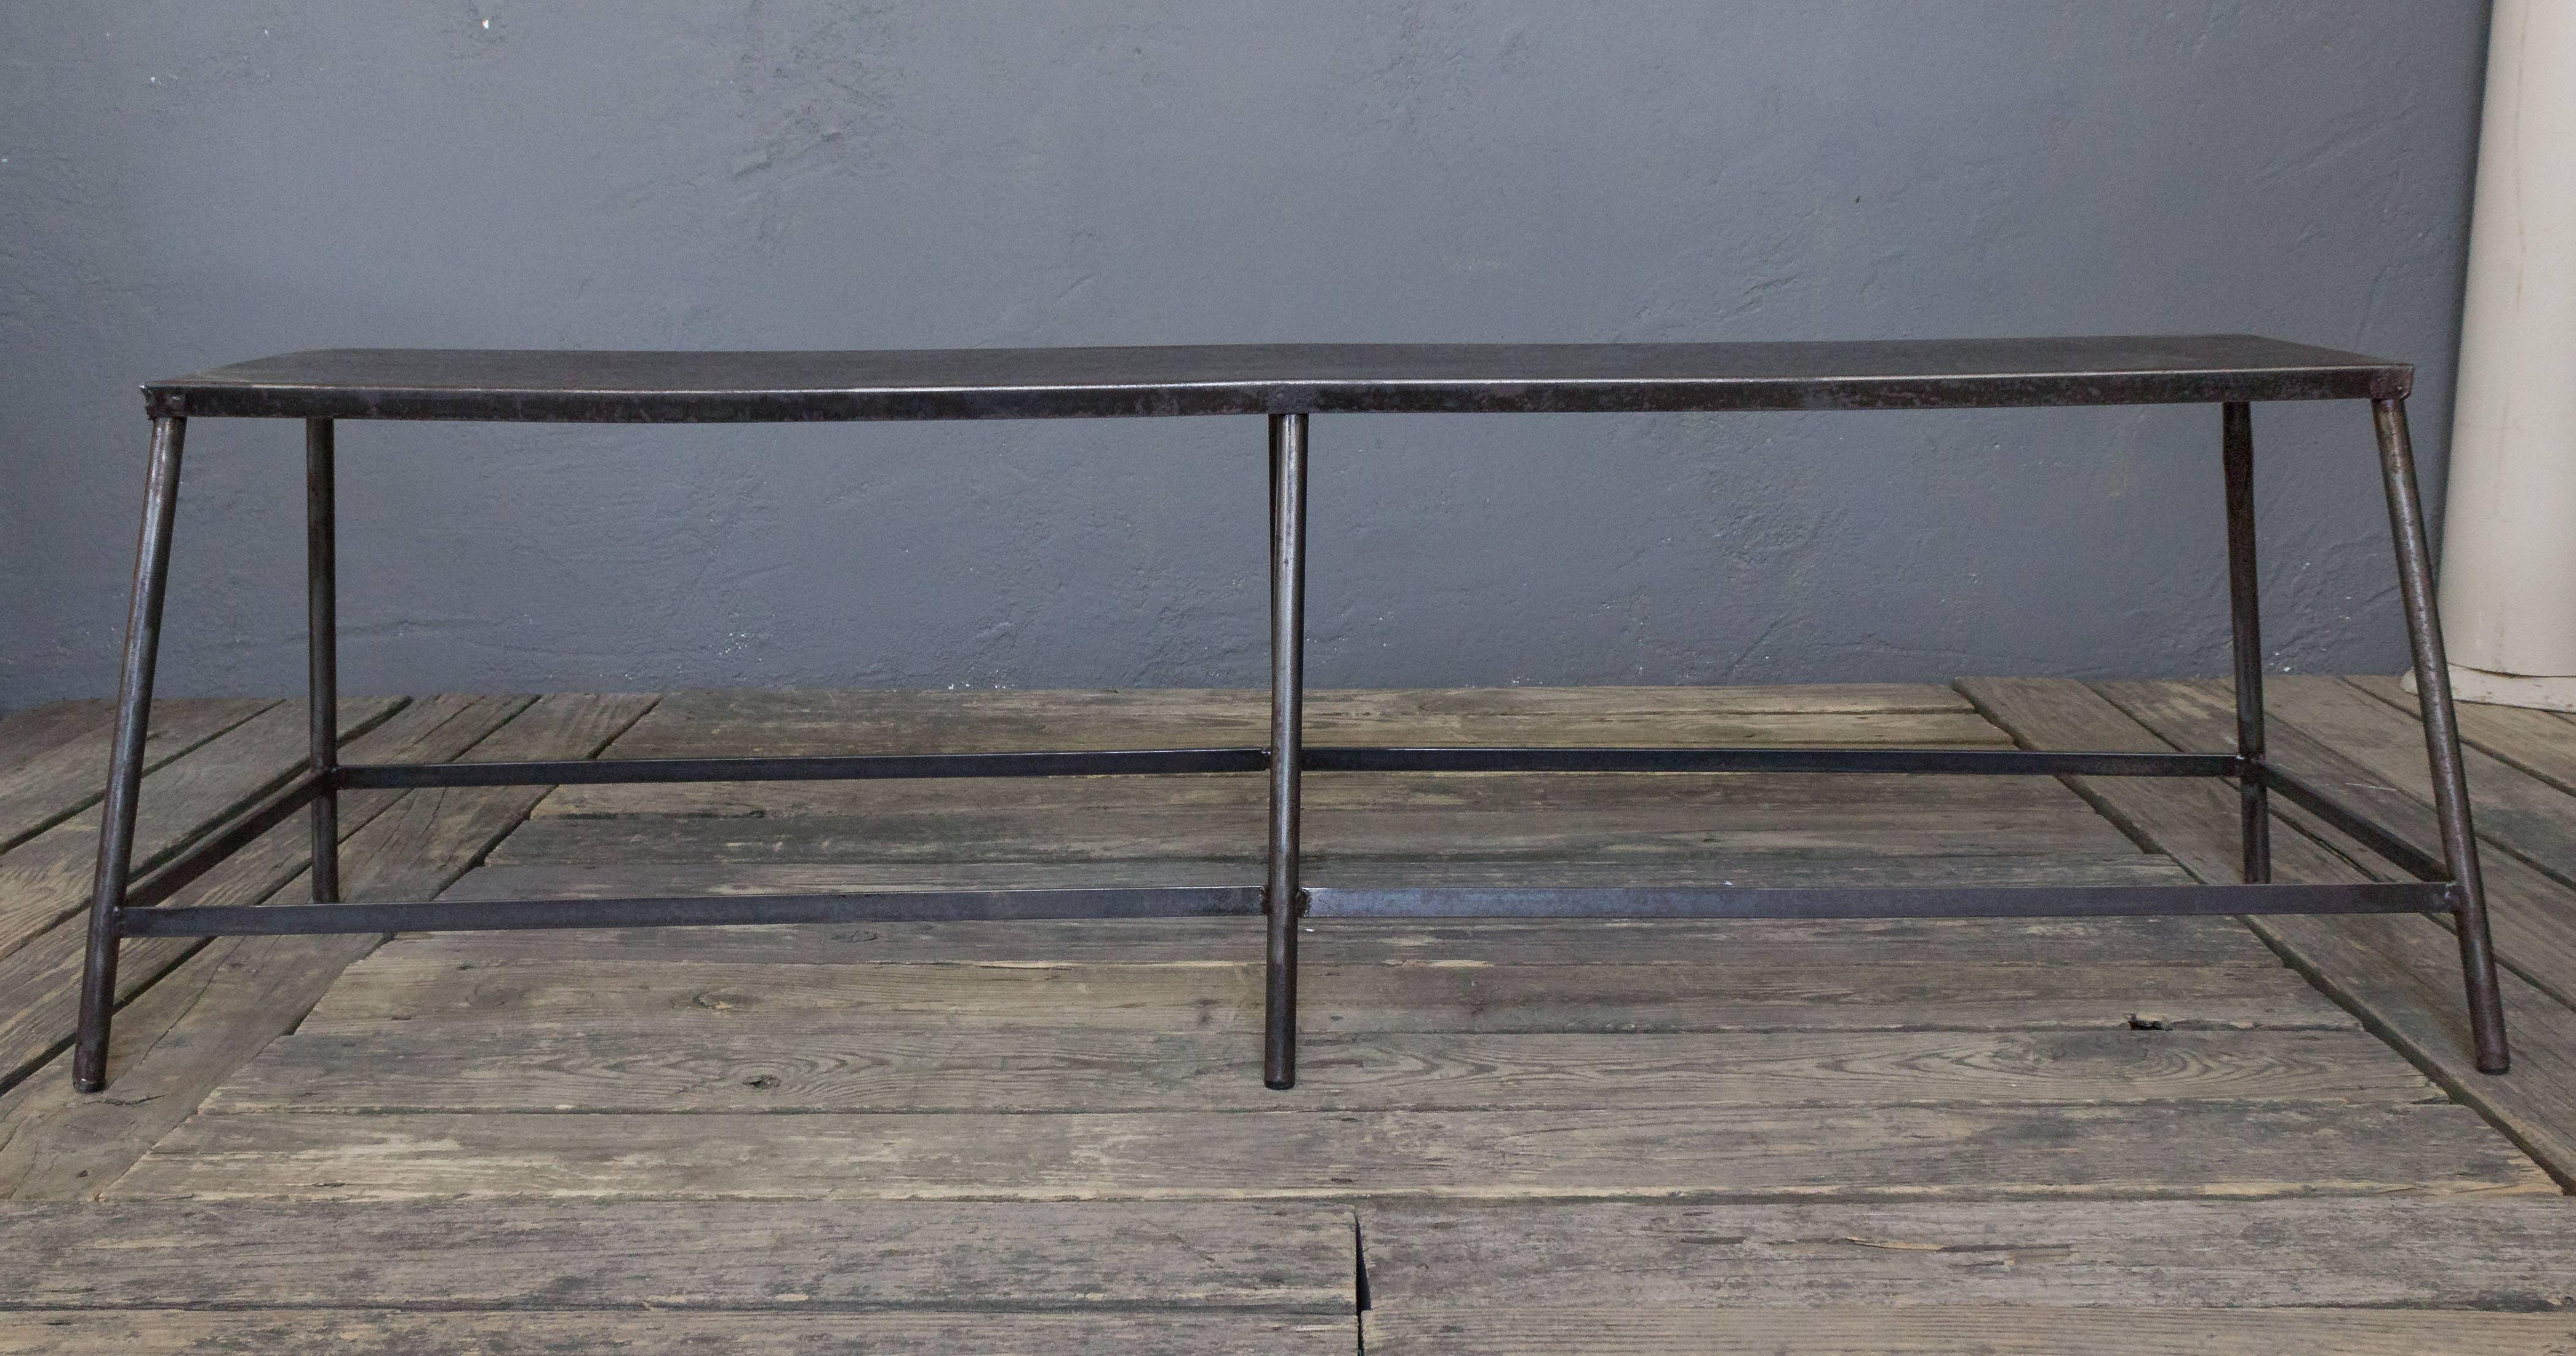 French polished metal industrial bench.. Measures: 18.5" H x 62.5" W x 17.75" D.